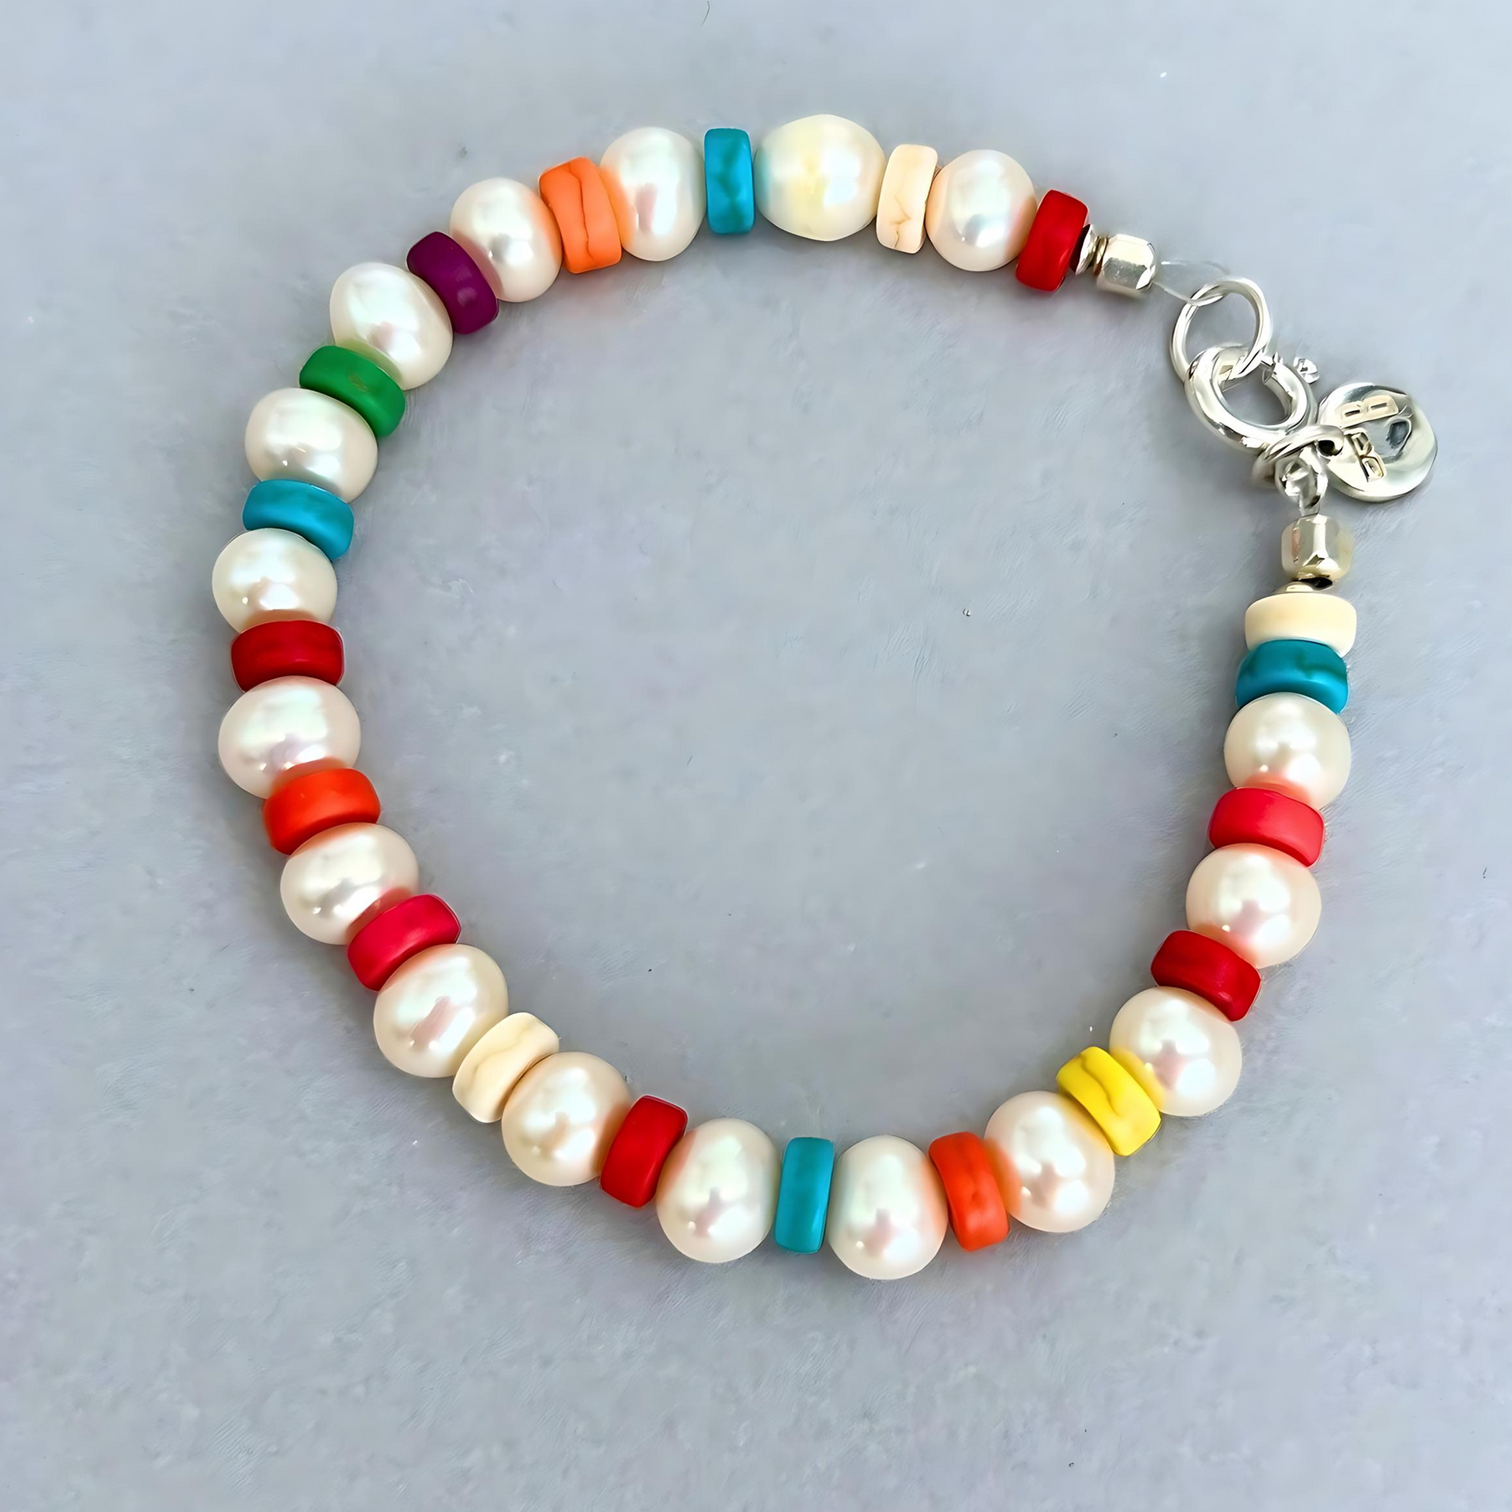 A grown-up version of the candy bracelets made with cultured white pearls and colourful howlite discs. The Le BijouBijou Candy Bracelet.